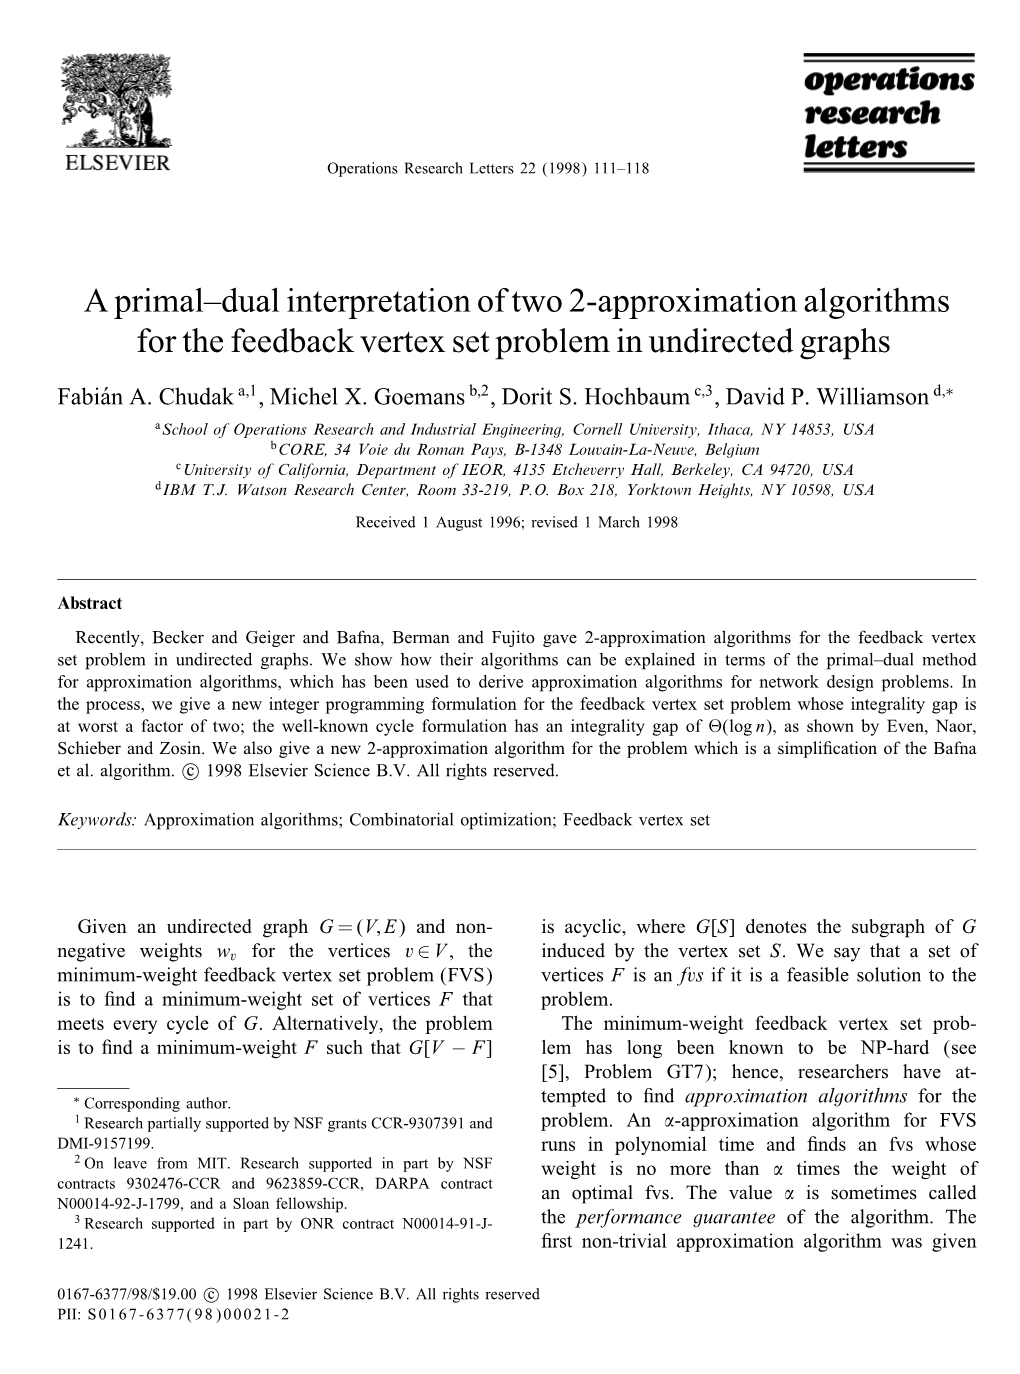 A Primal–Dual Interpretation of Two 2-Approximation Algorithms for the Feedback Vertex Set Problem in Undirected Graphs